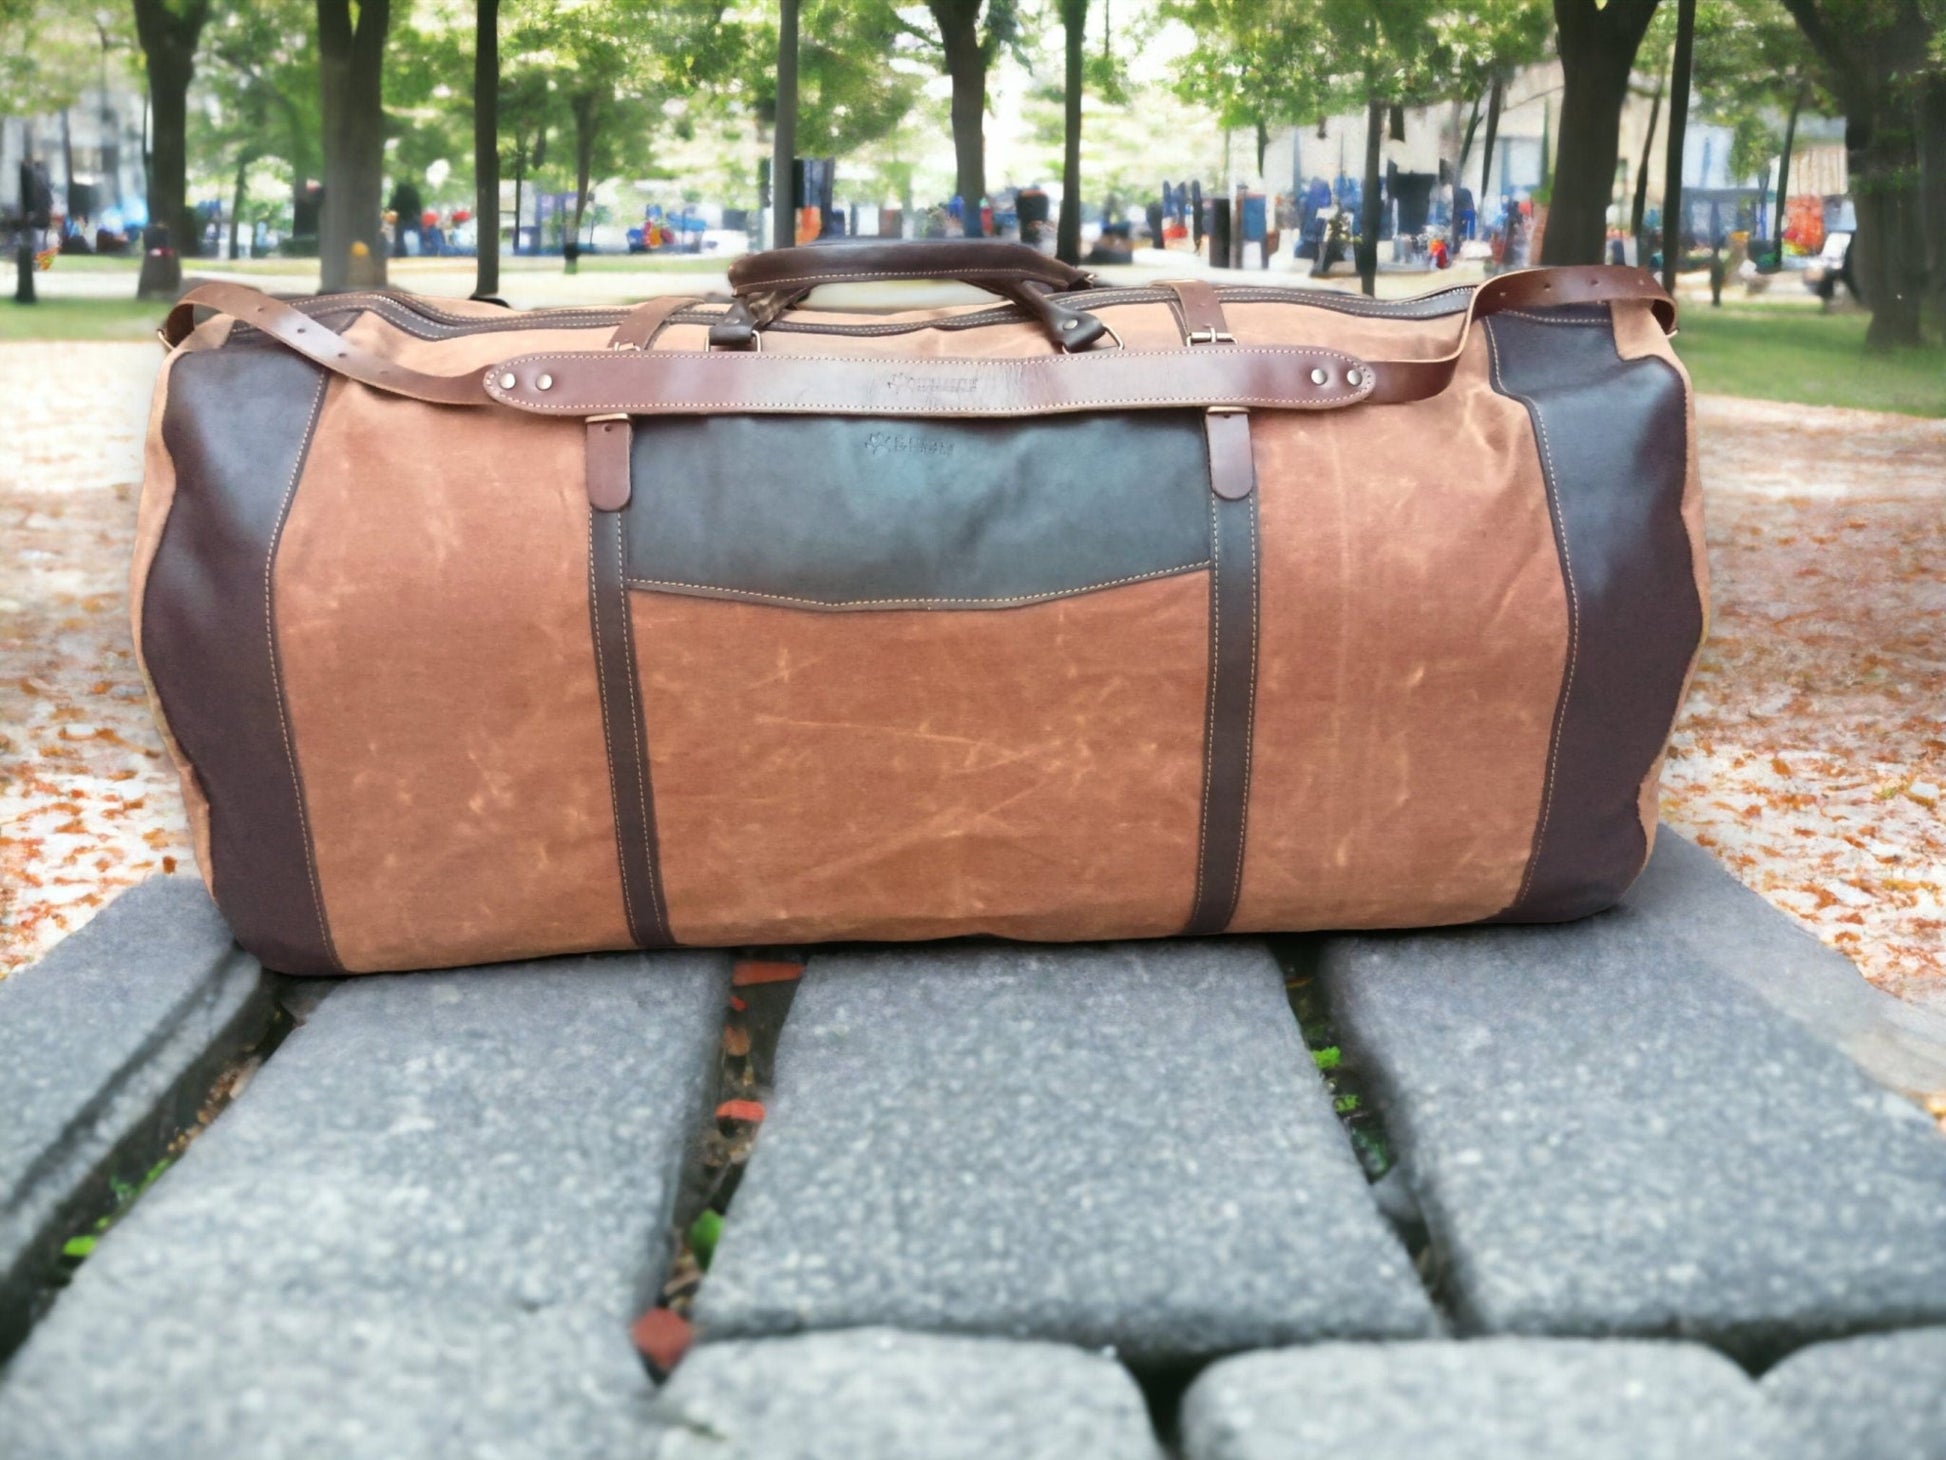 180 Liter | Duffle Bag |  Leather | Canvas | Travel Holdall | Luggage | Carry All Holdall |  Leather Luggage | Carry on Baggage, Suitcase  99percenthandmade   